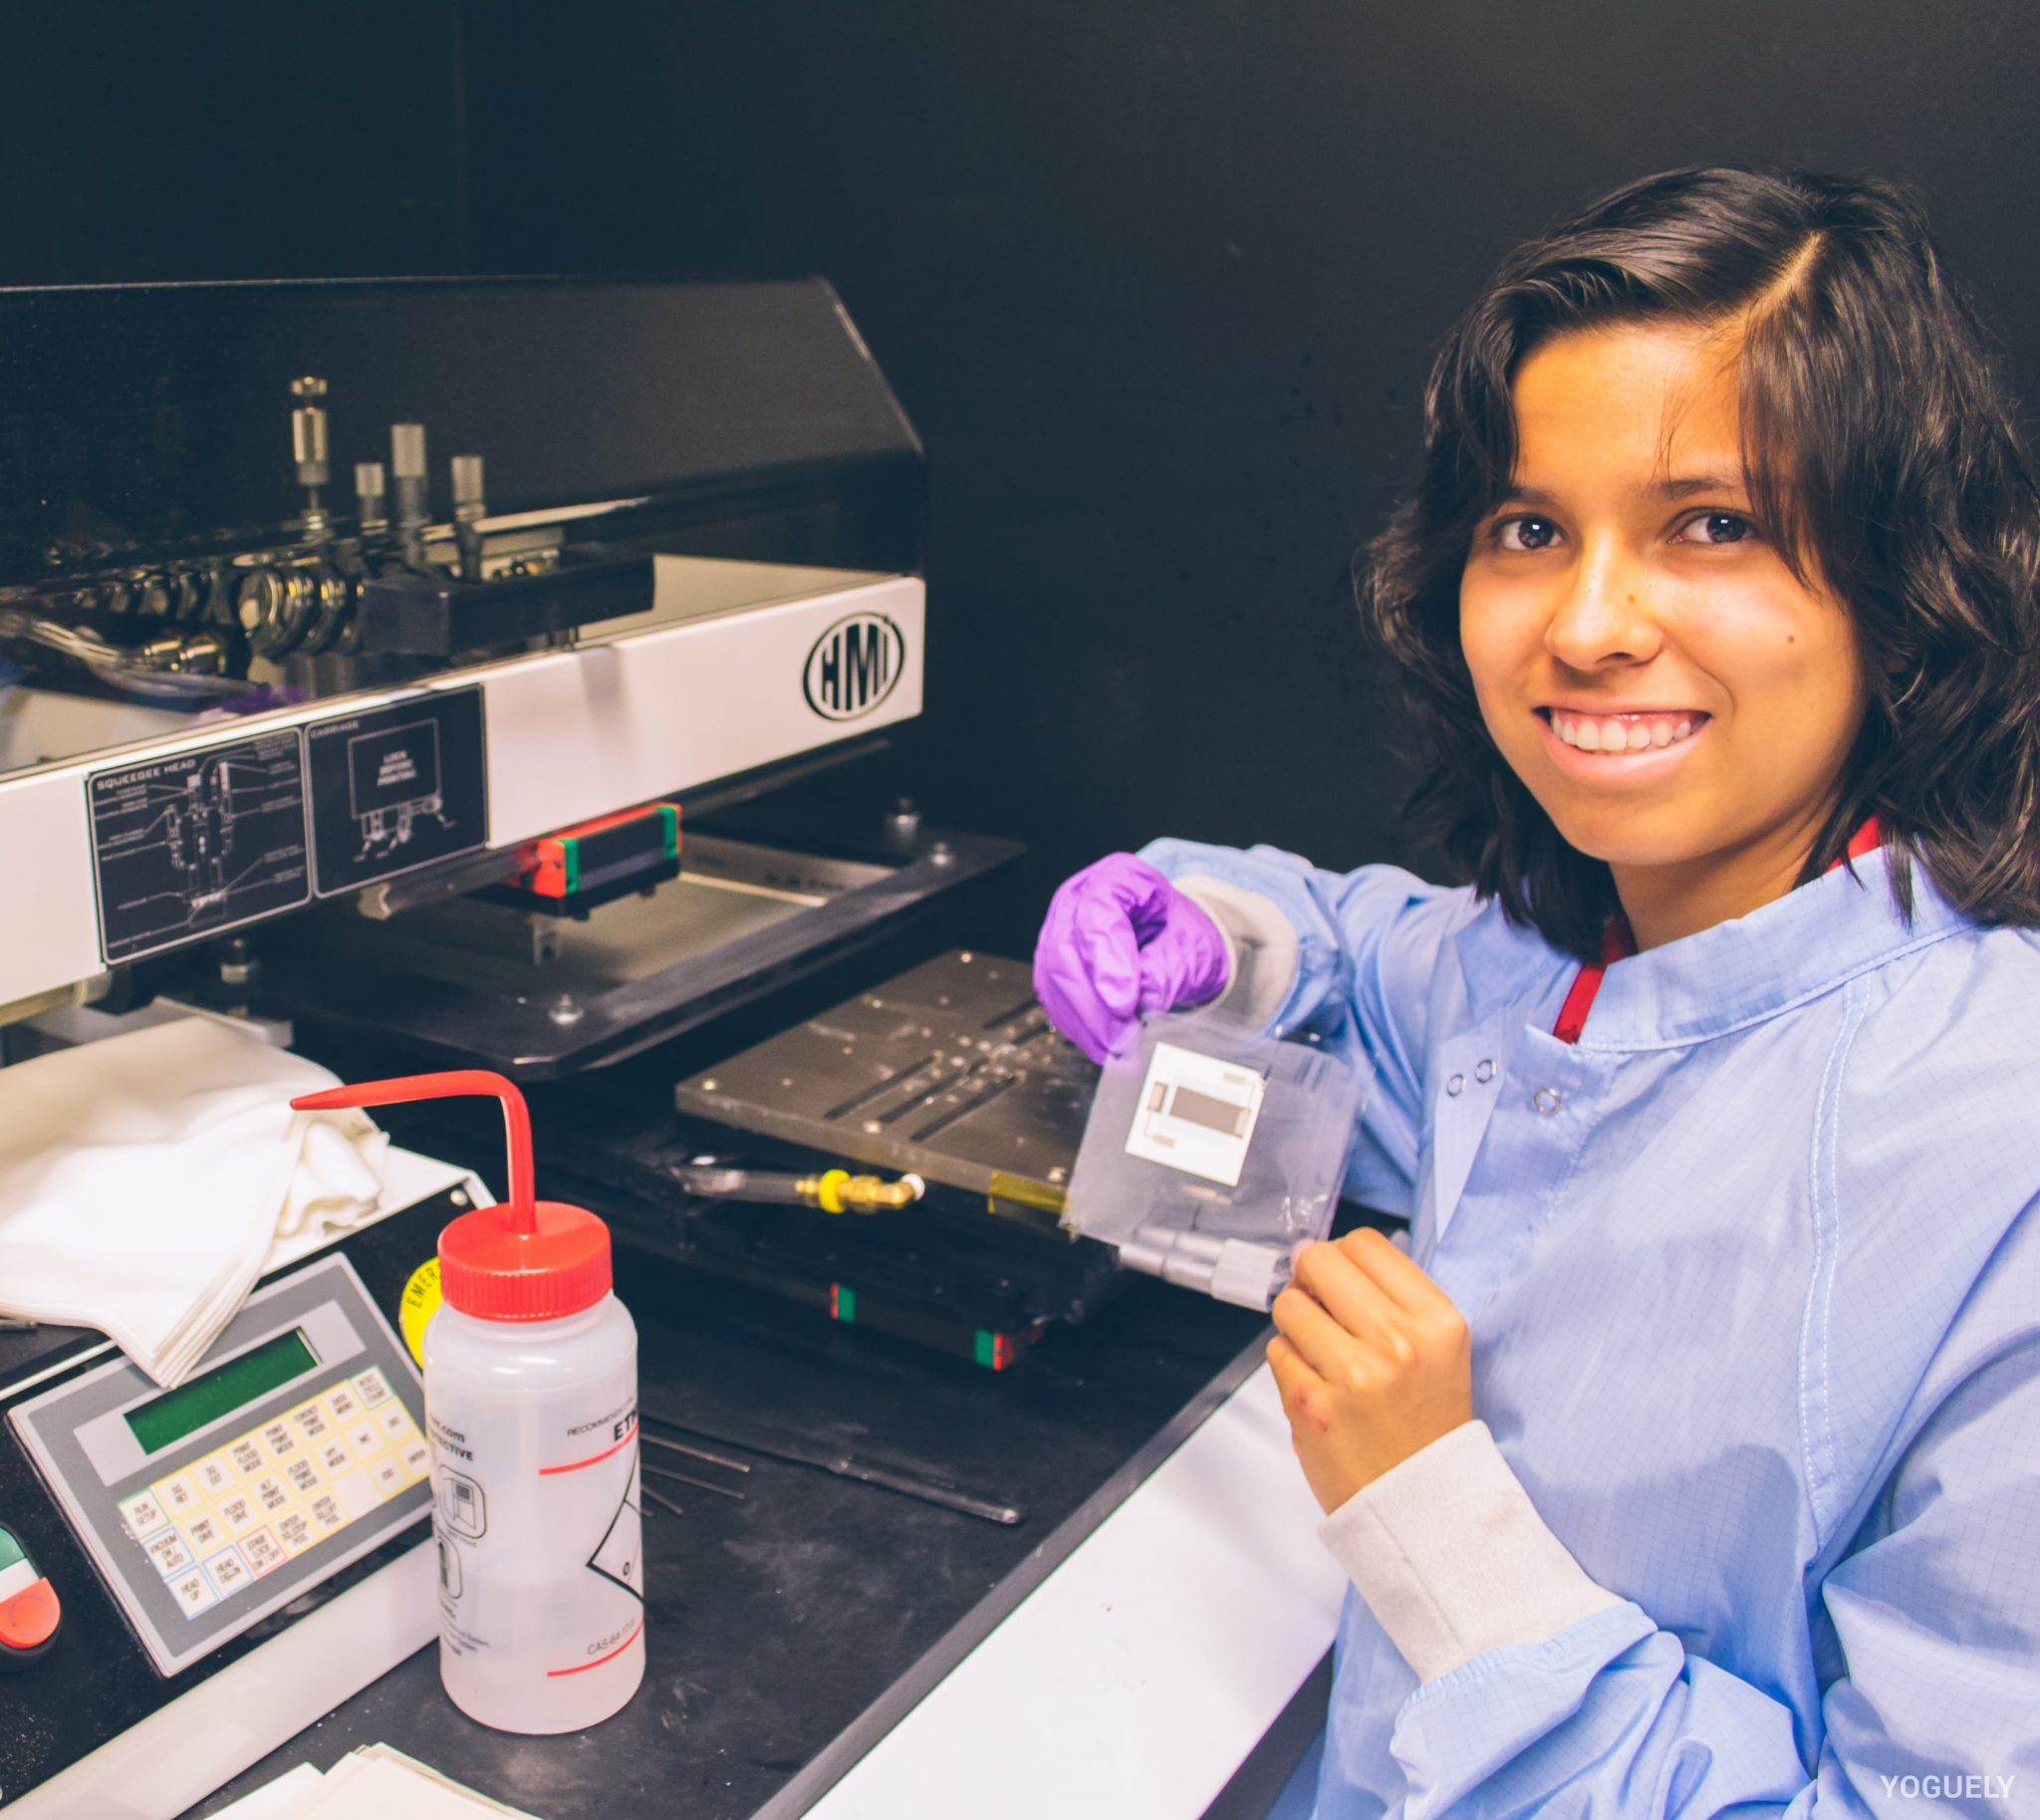 Aida Yoguely during her summer internship at the NASA Marshall Space Center. Developing the next state-of-the art ultracapacitor to replace batteries.